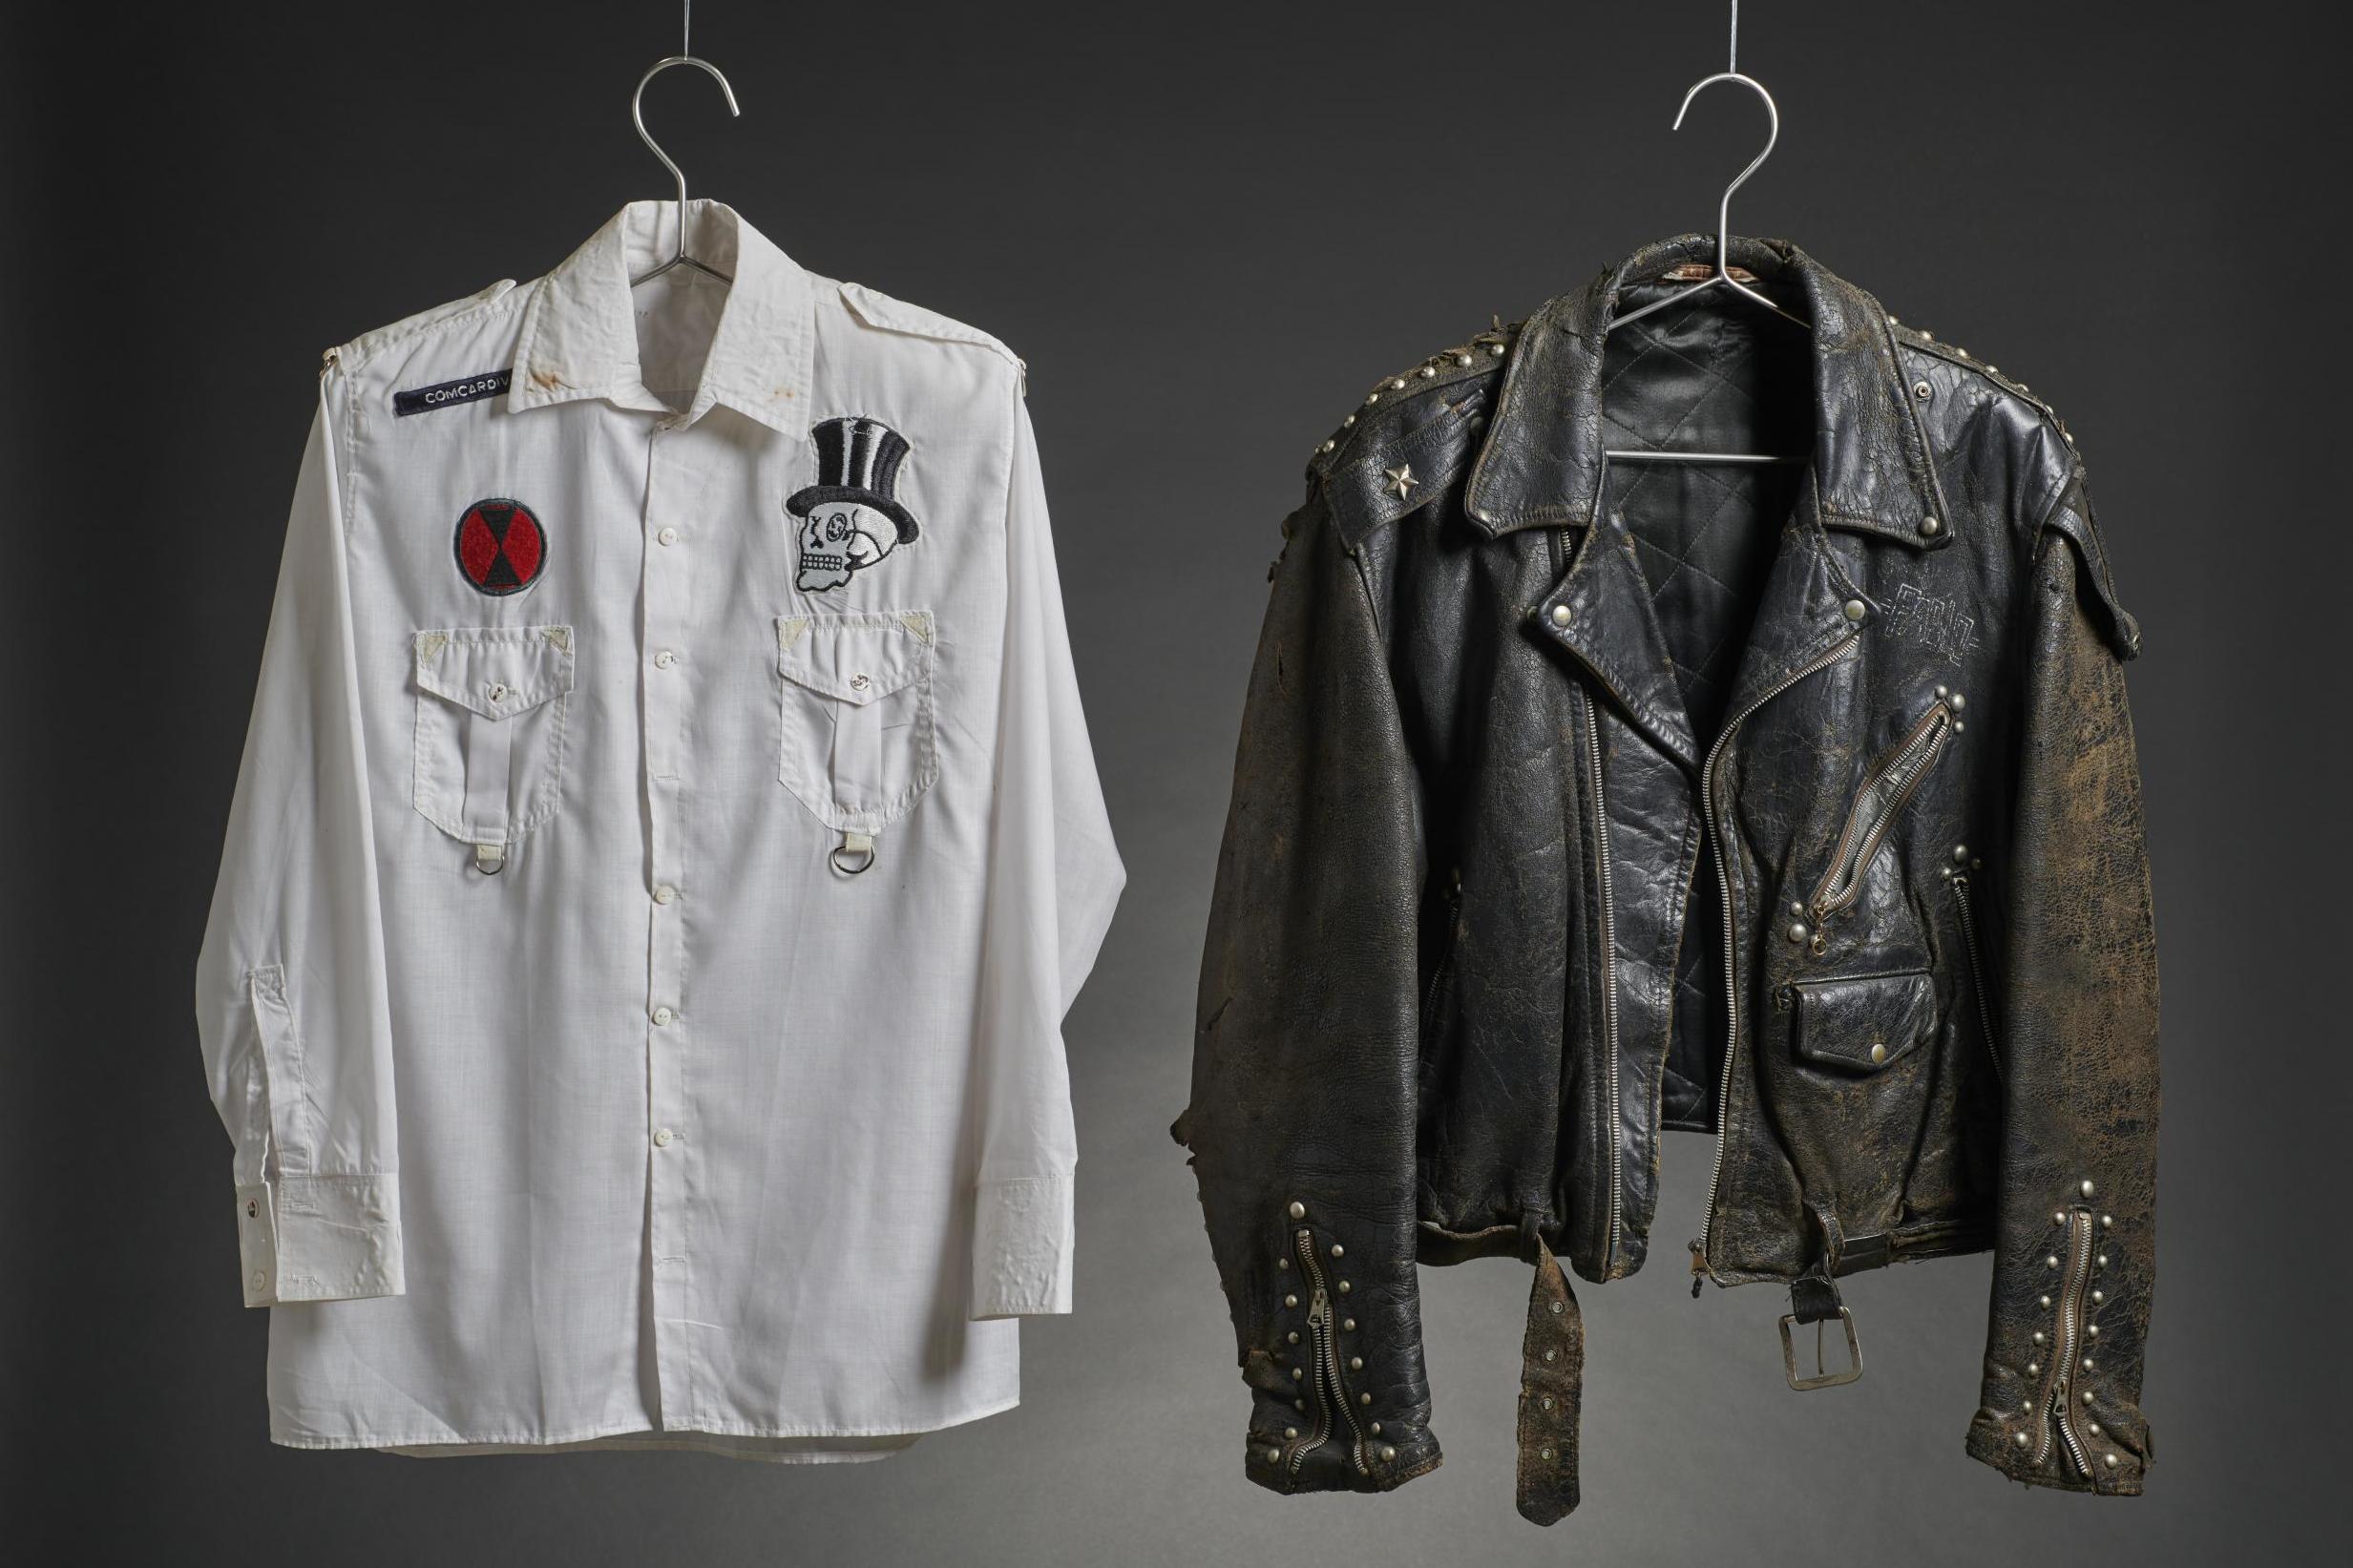 White shirt and leather jacket worn by The Clash, on display at the Museum of London